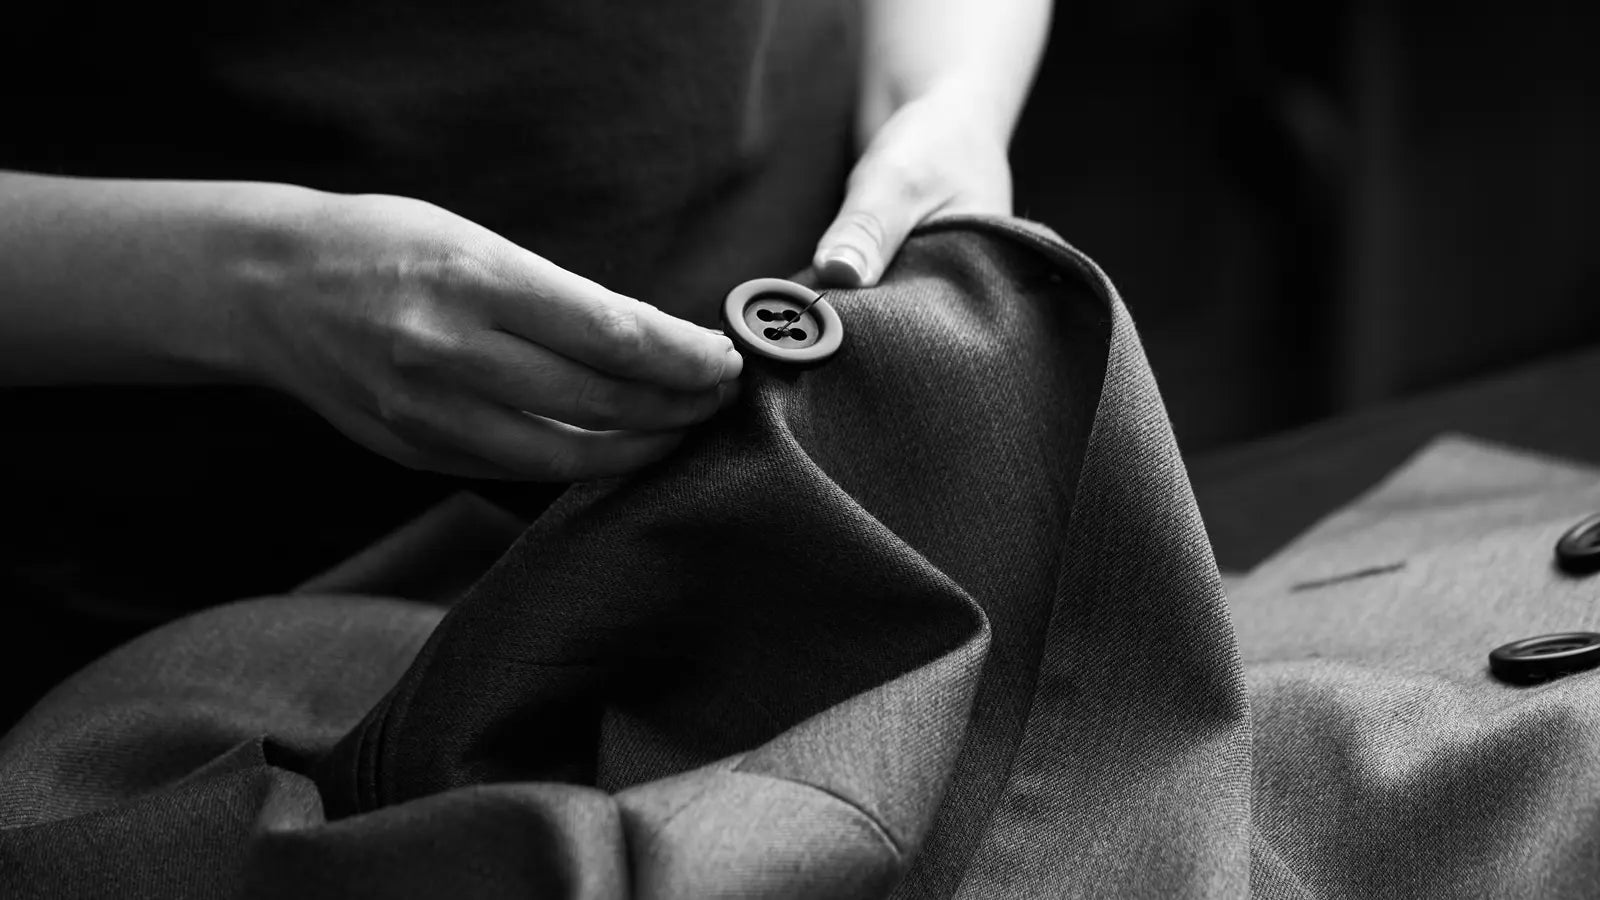 The Art of Hand-Sewn Buttonholes and Hand Stitching: The Hallmark of Luxury Menswear